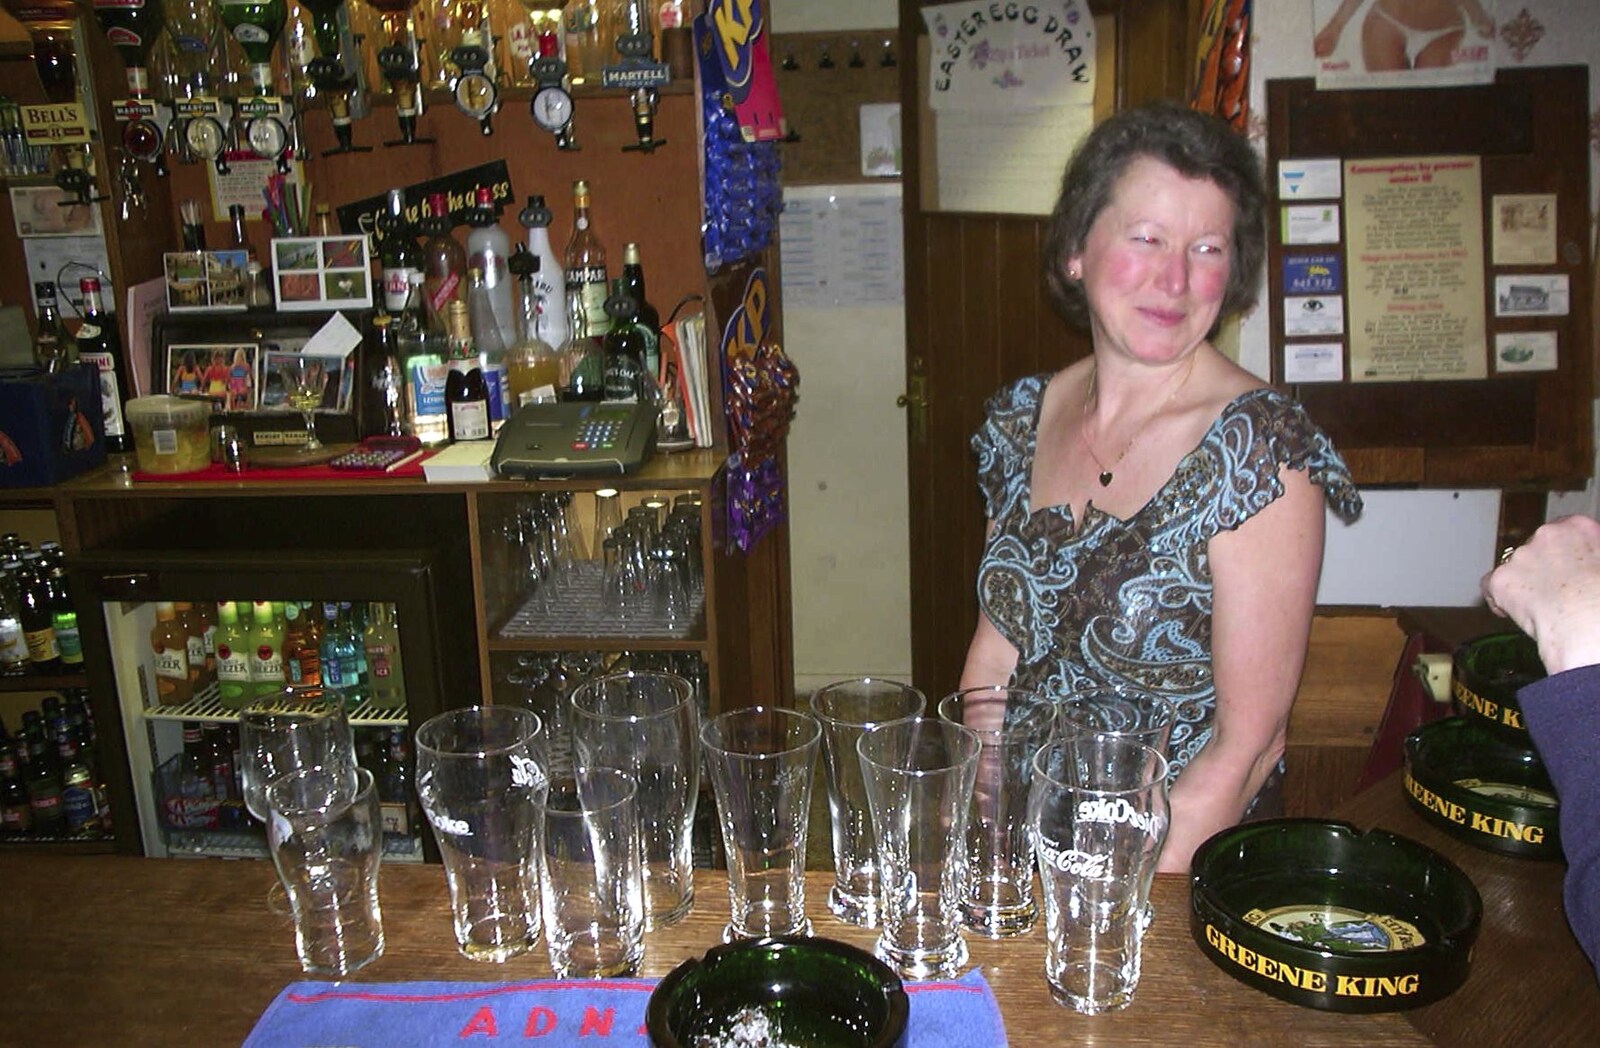 Paul and Claire's Engagement Party, Brome Swan, Suffolk - 27th March 2004: Sylvia with a load of clean glasses